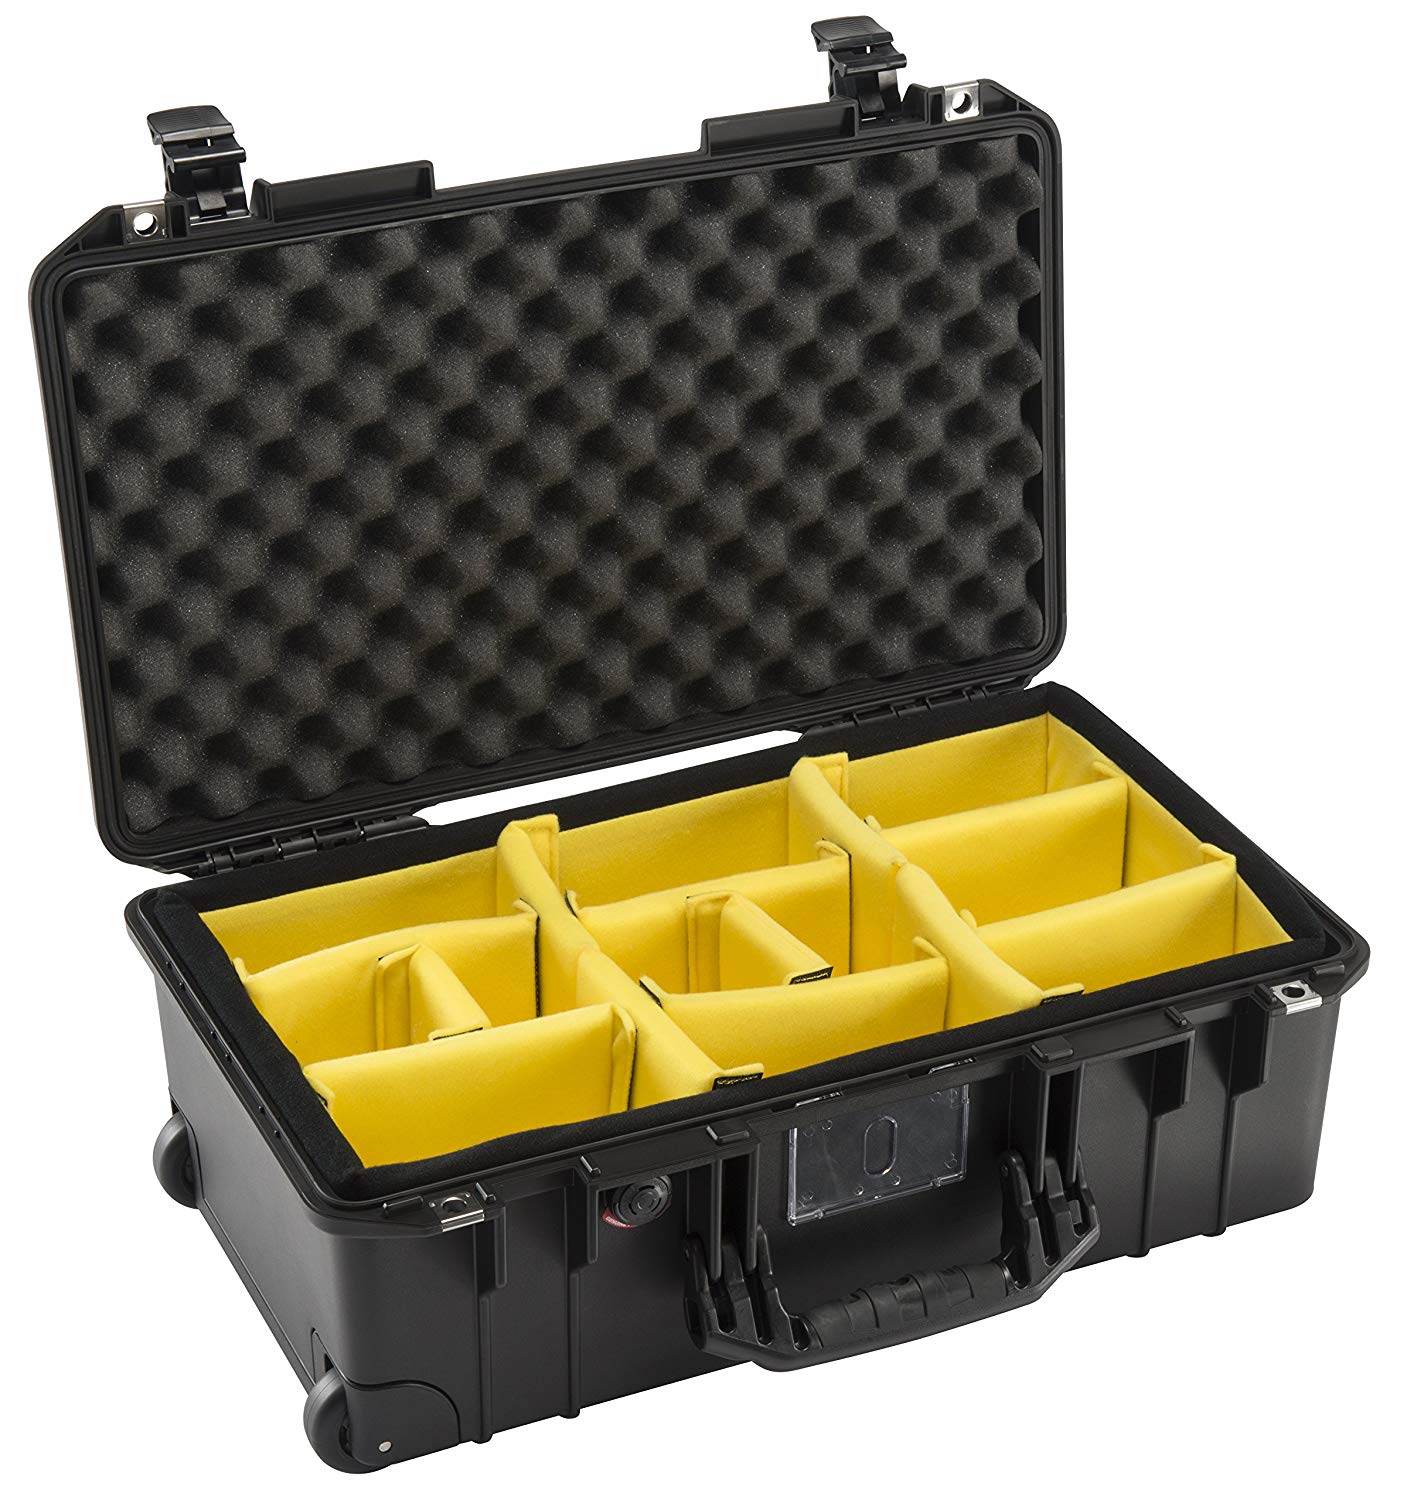 Pelican Air 1535 Case with Padded Dividers